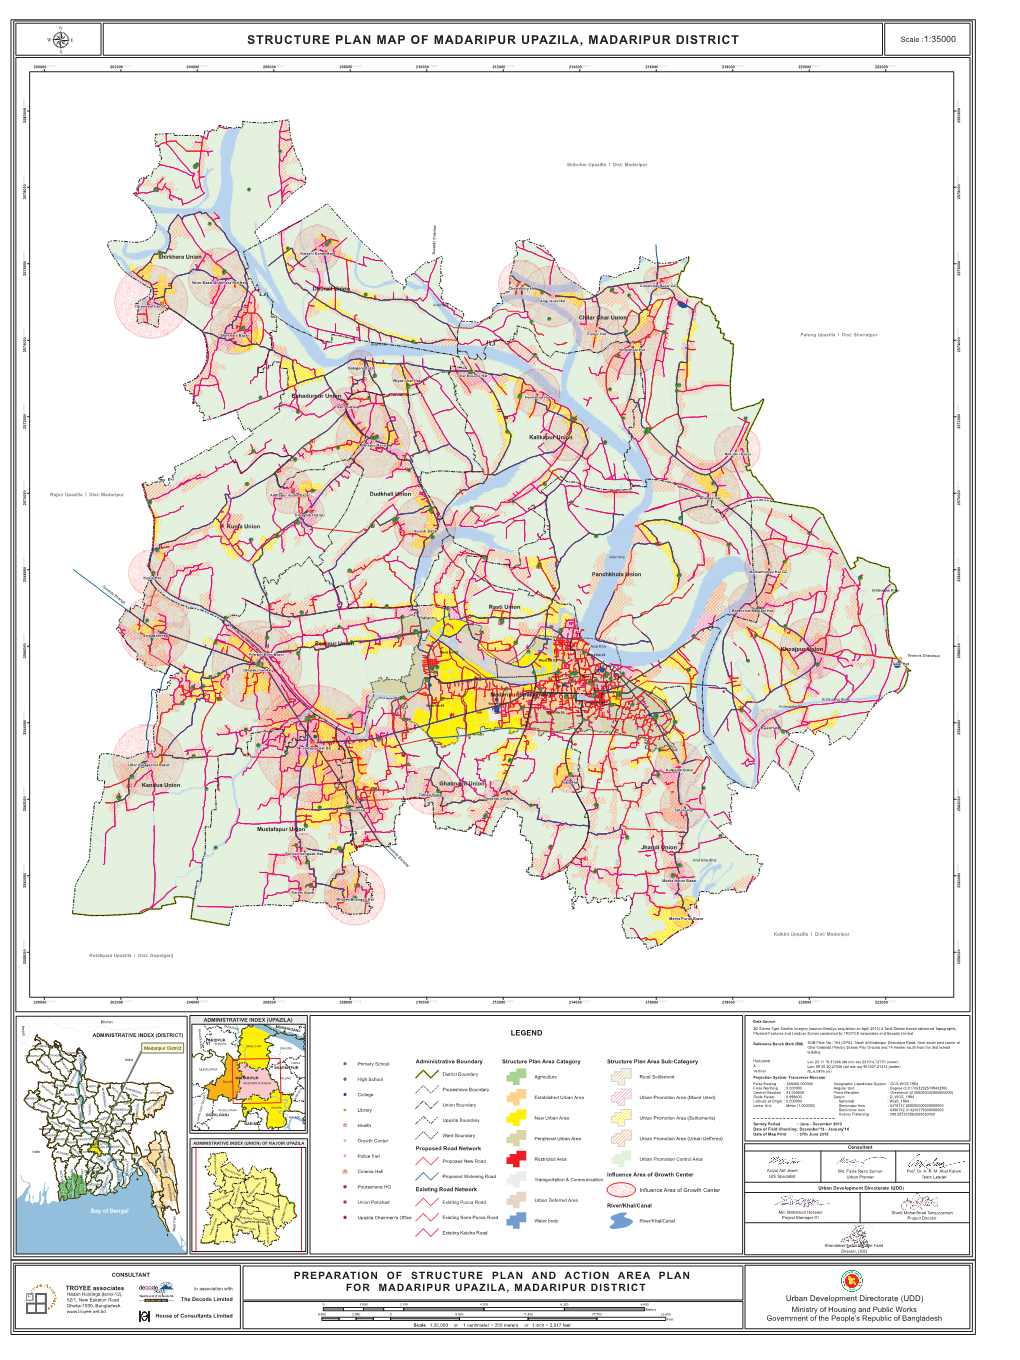 STRUCTURE PLAN MAP of MADARIPUR UPAZILA, MADARIPUR DISTRICT Scale :1:35000